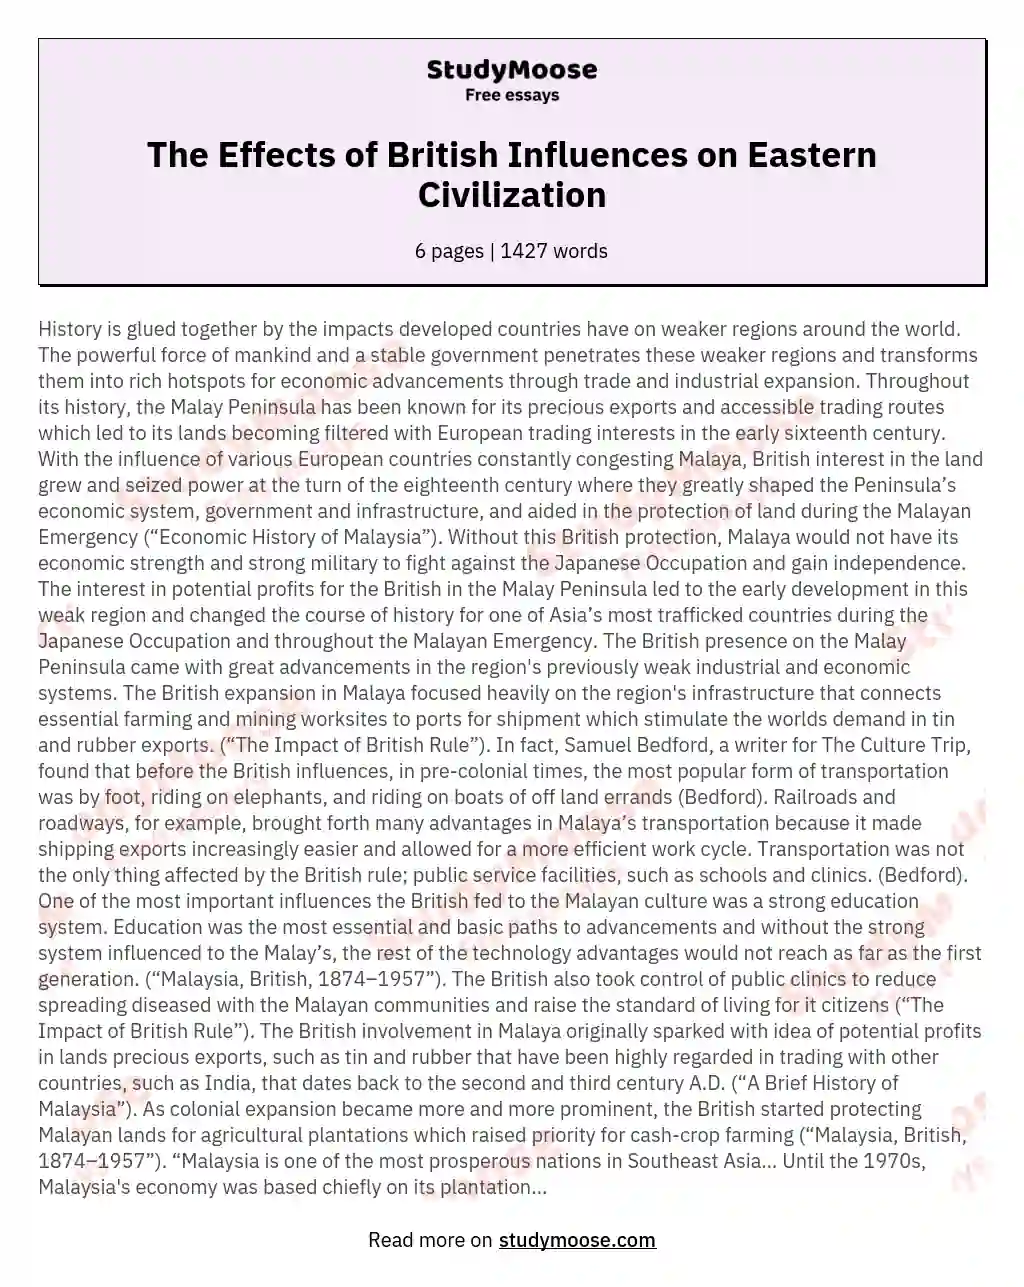 The Effects of British Influences on Eastern Civilization essay